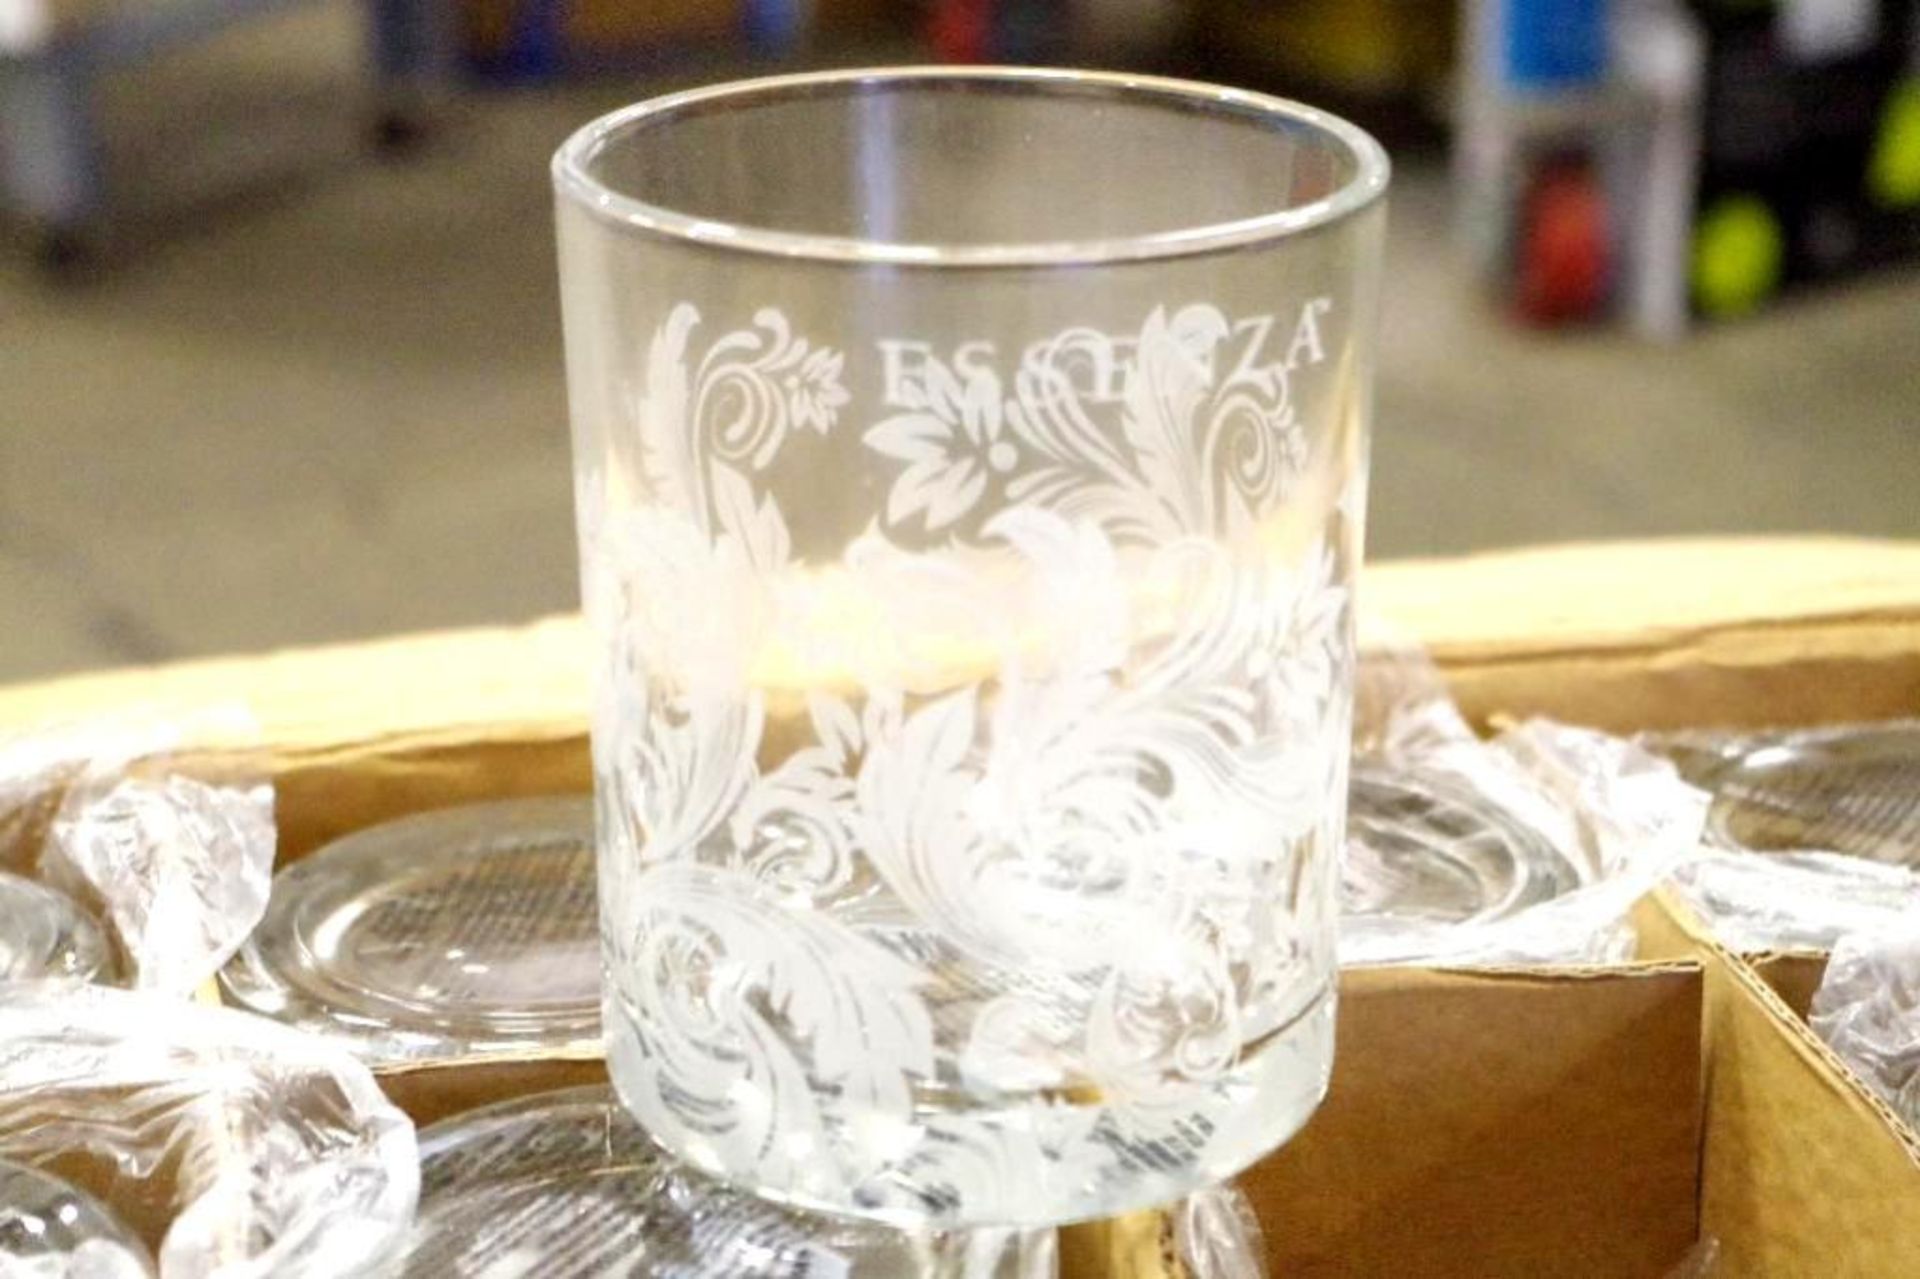 [96] ESSENZA Candle Votives, 3mm, 12 oz. Glass w/ Frosted Decorative Image - Image 2 of 5